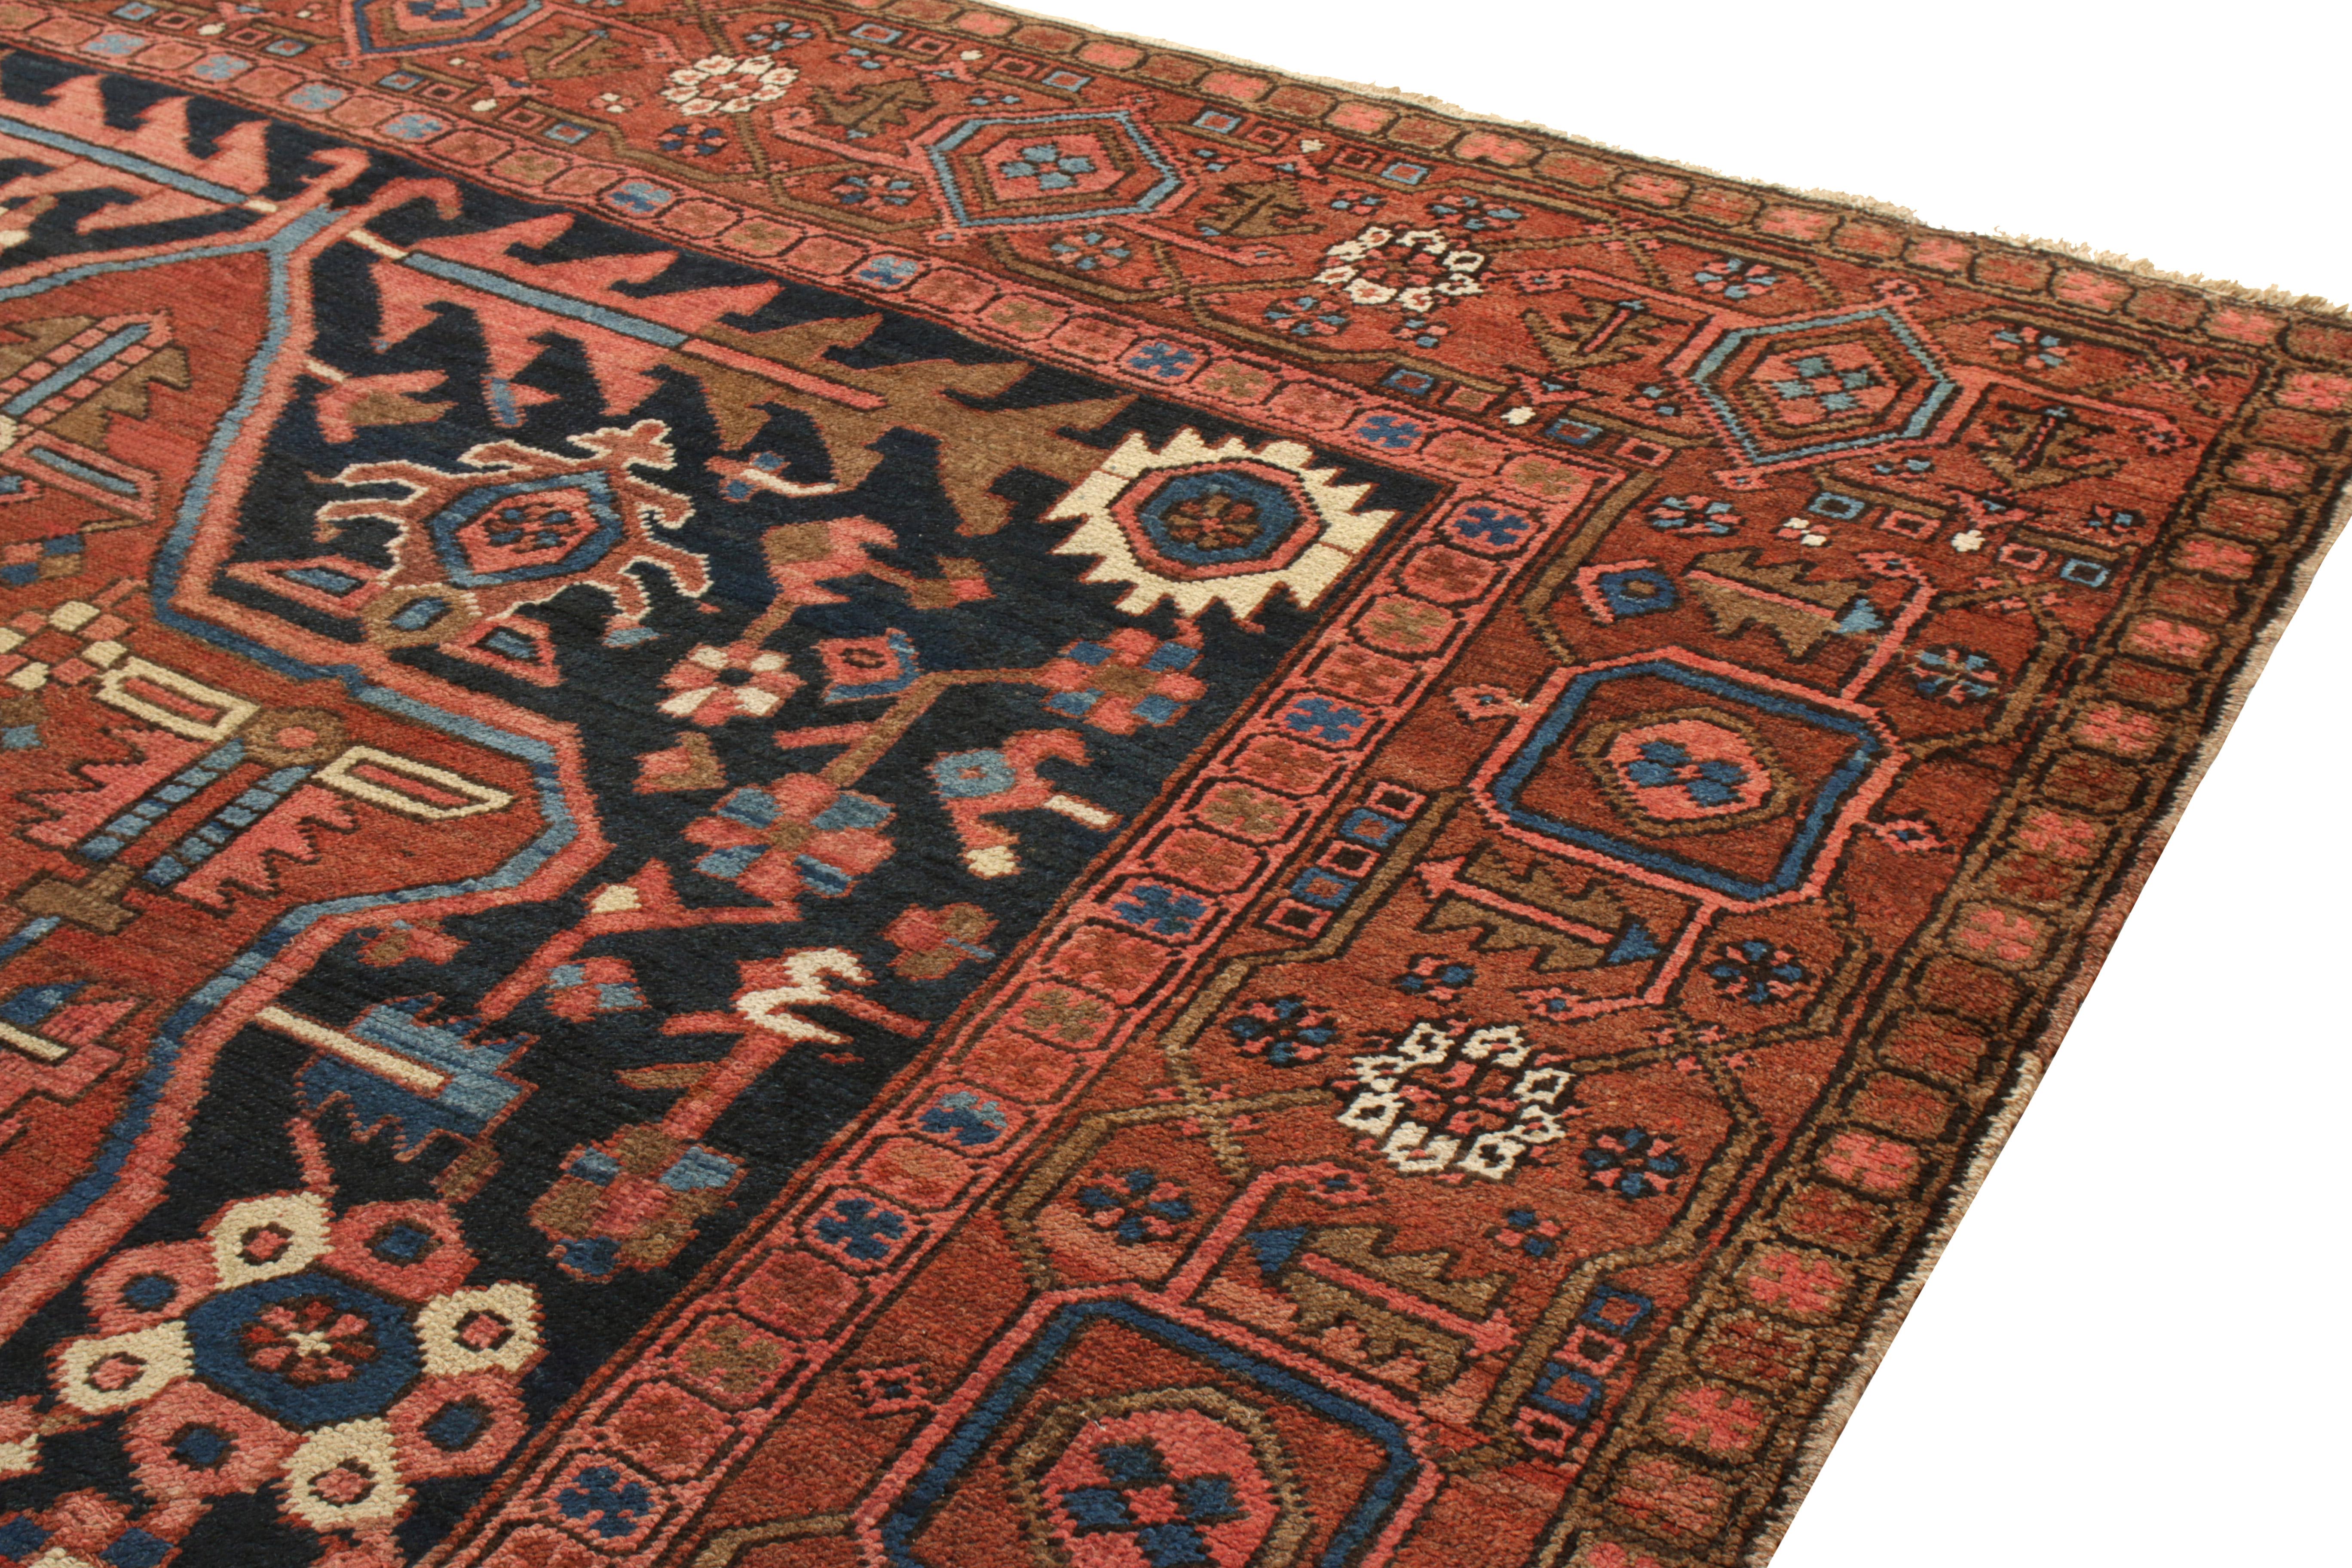 Early 20th Century Hand-Knotted Antique Persian Rug in Red, Brown, Medallion Pattern by Rug & Kilim